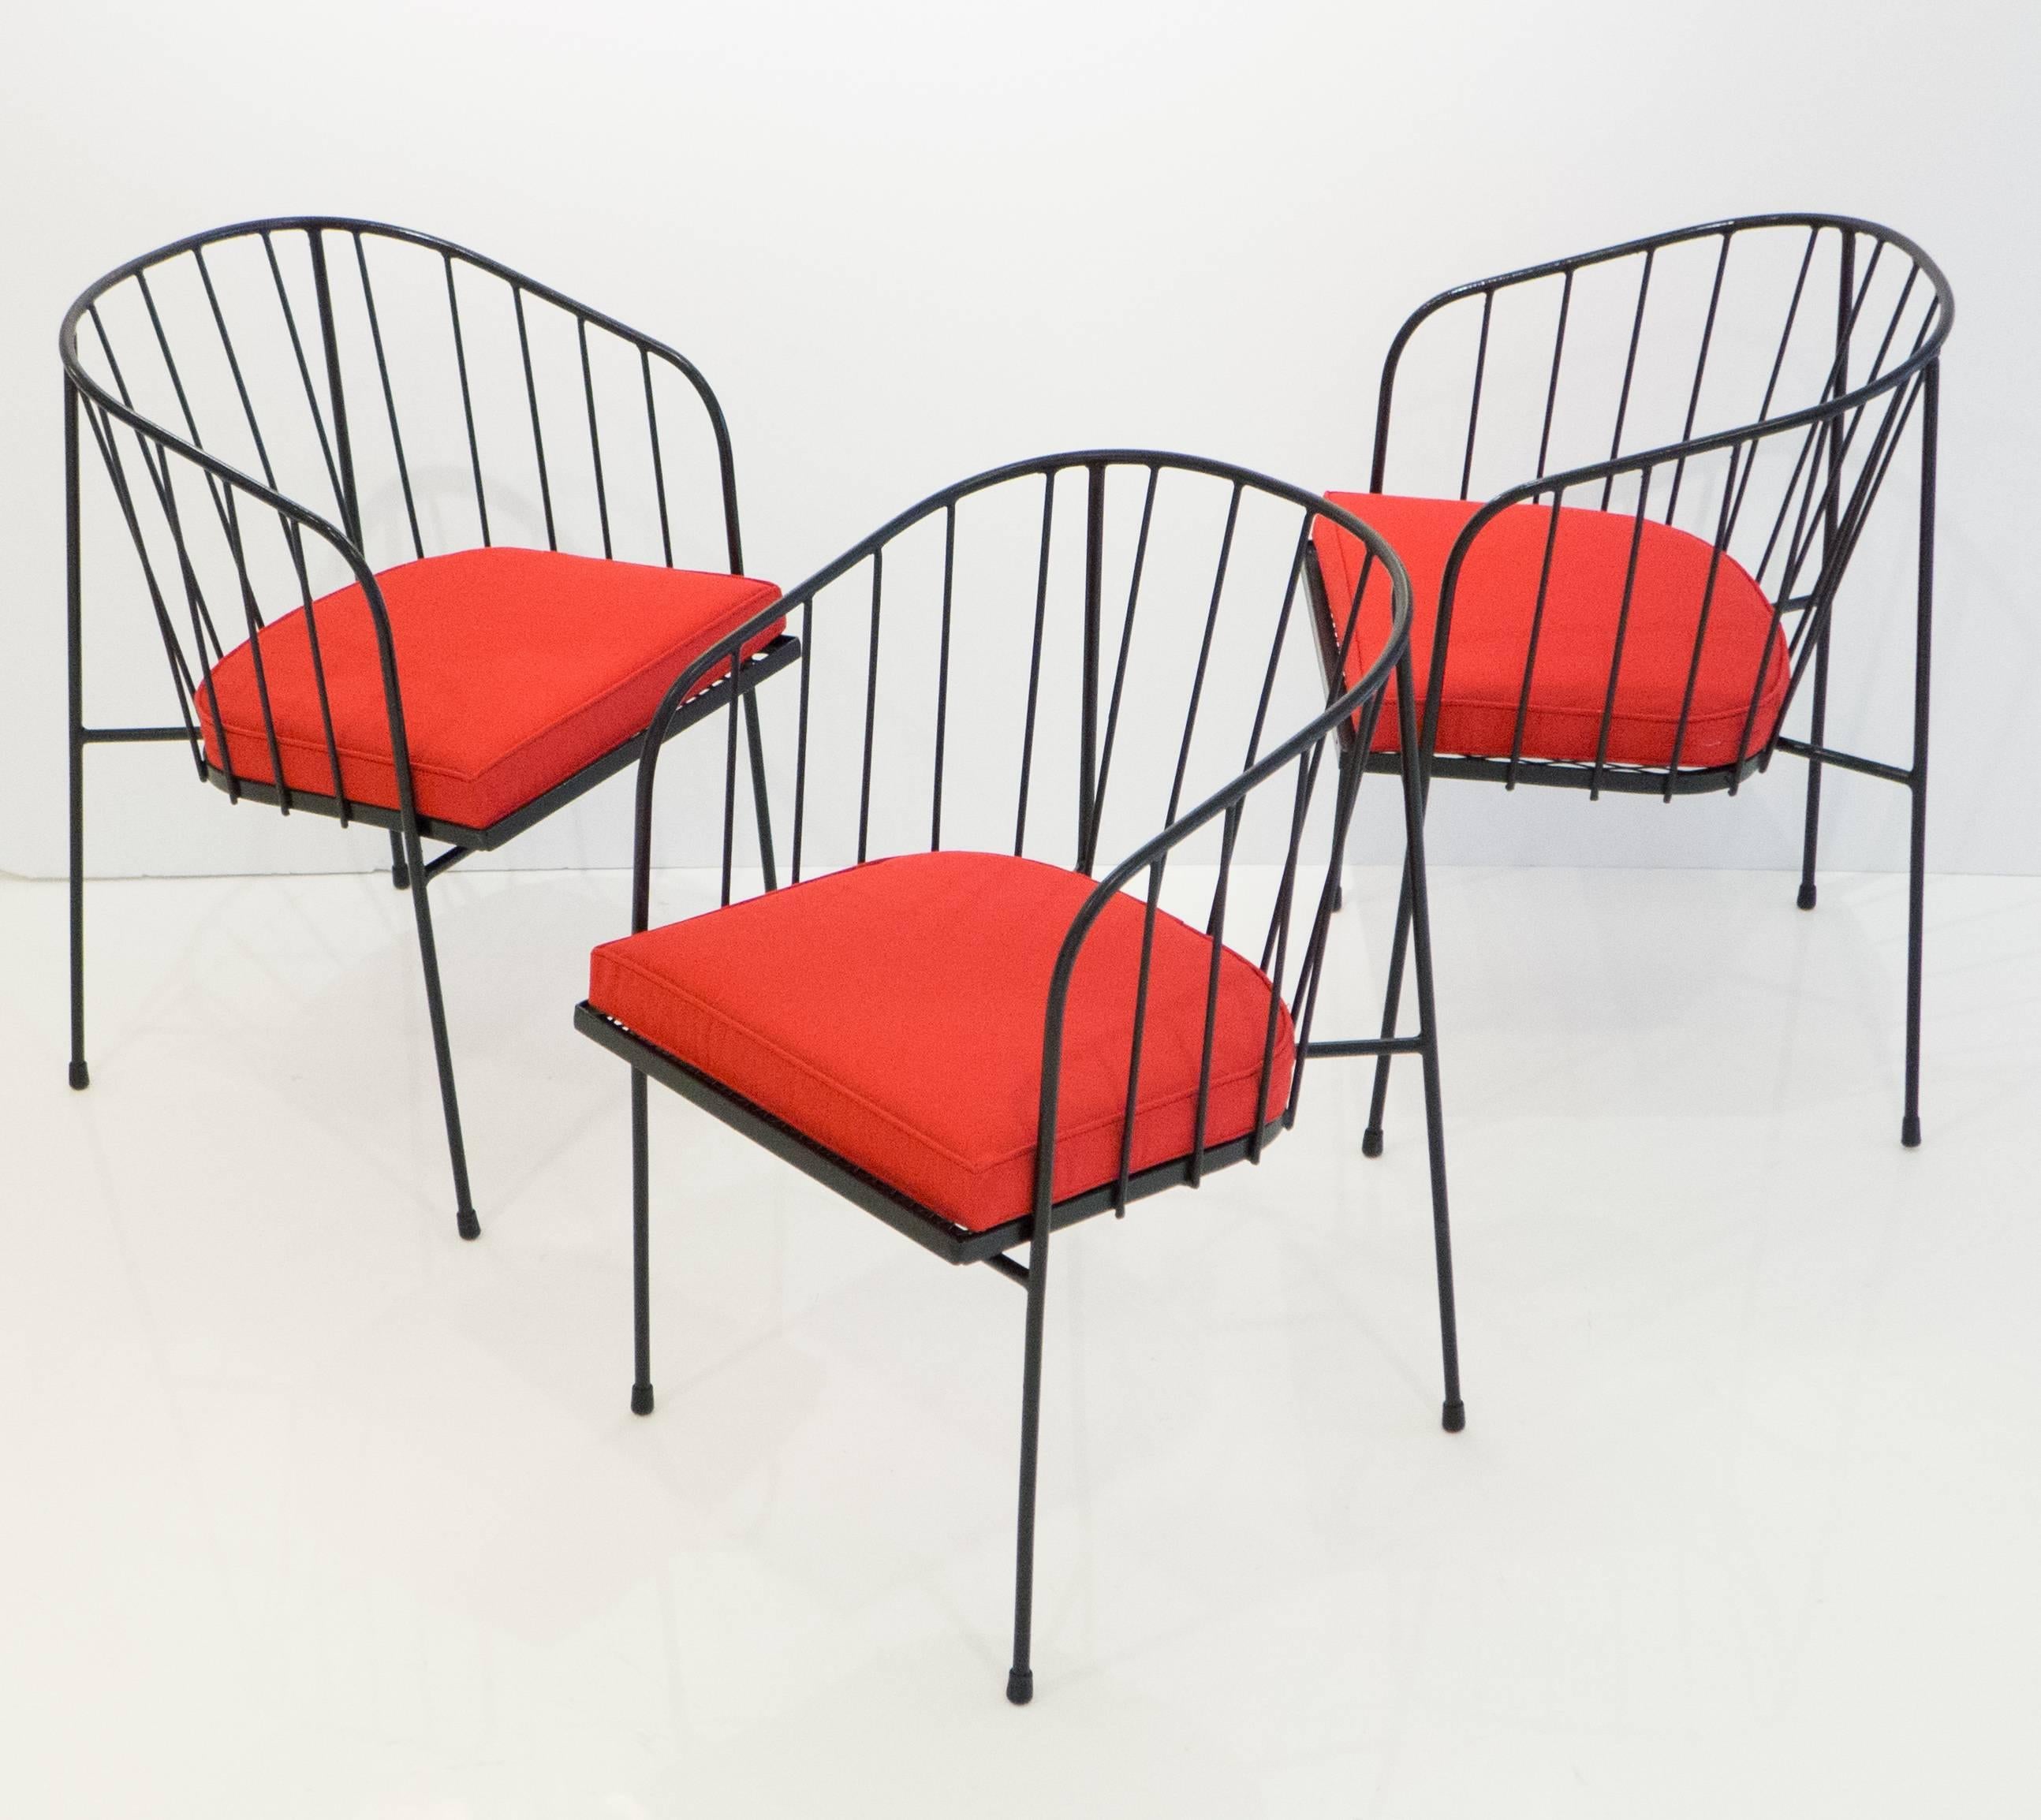 Set of three wrought iron outdoor chairs designed by George Nelson and produced by Arbuck for a brief period in 1951-1952, and so rare to the market. The front legs and backrest are one wraparound piece, with welded back legs. The mesh seat is